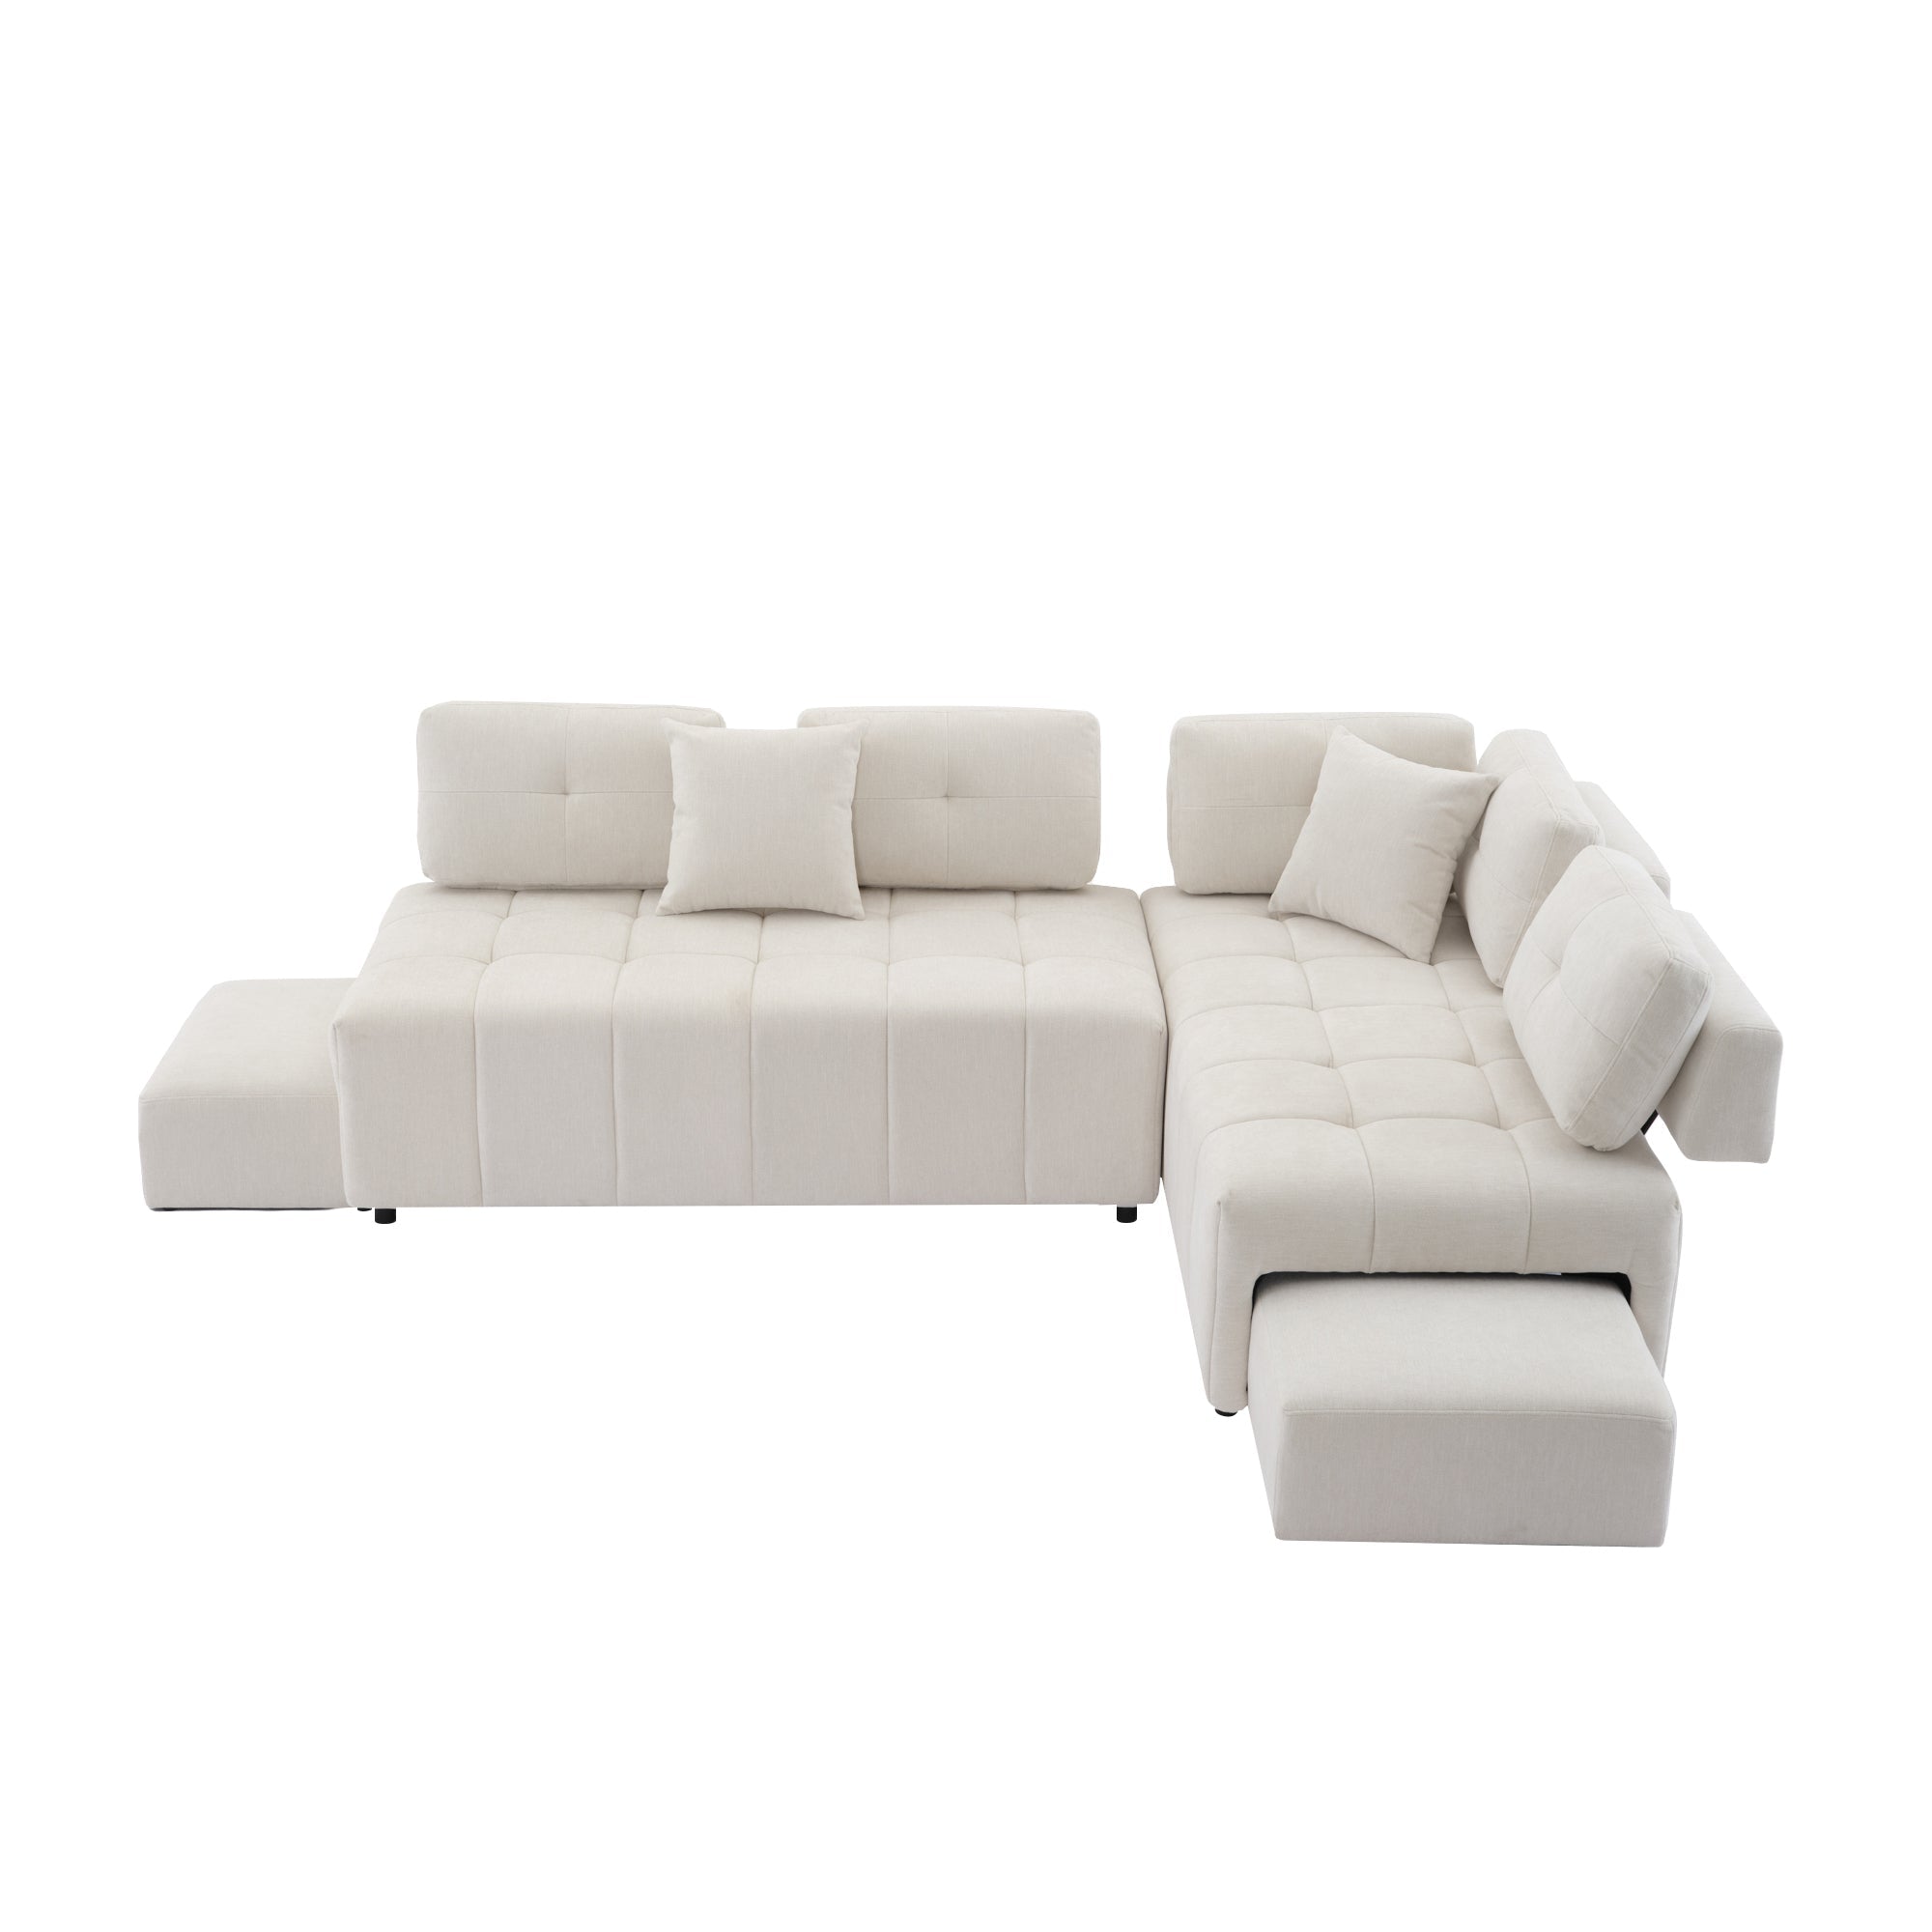 L-Shaped Sectional Sofa Couch, 91.73", Biege w/ 2 Stools & Lumbar Pillows | Living Room-Stationary Sectionals-American Furniture Outlet